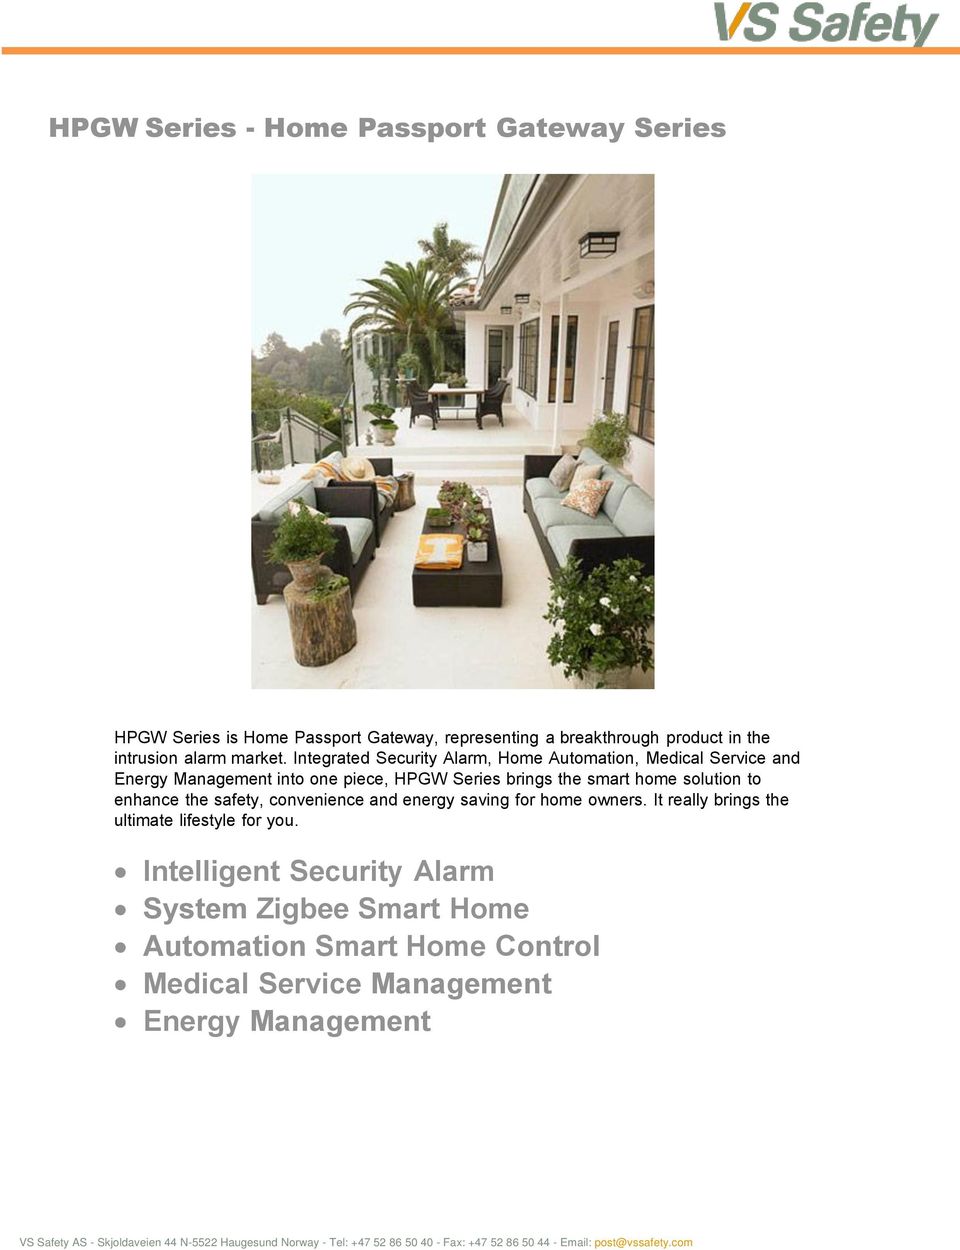 Integrated Security Alarm, Home Automation, Medical Service and Energy Management into one piece, HPGW Series brings the smart home